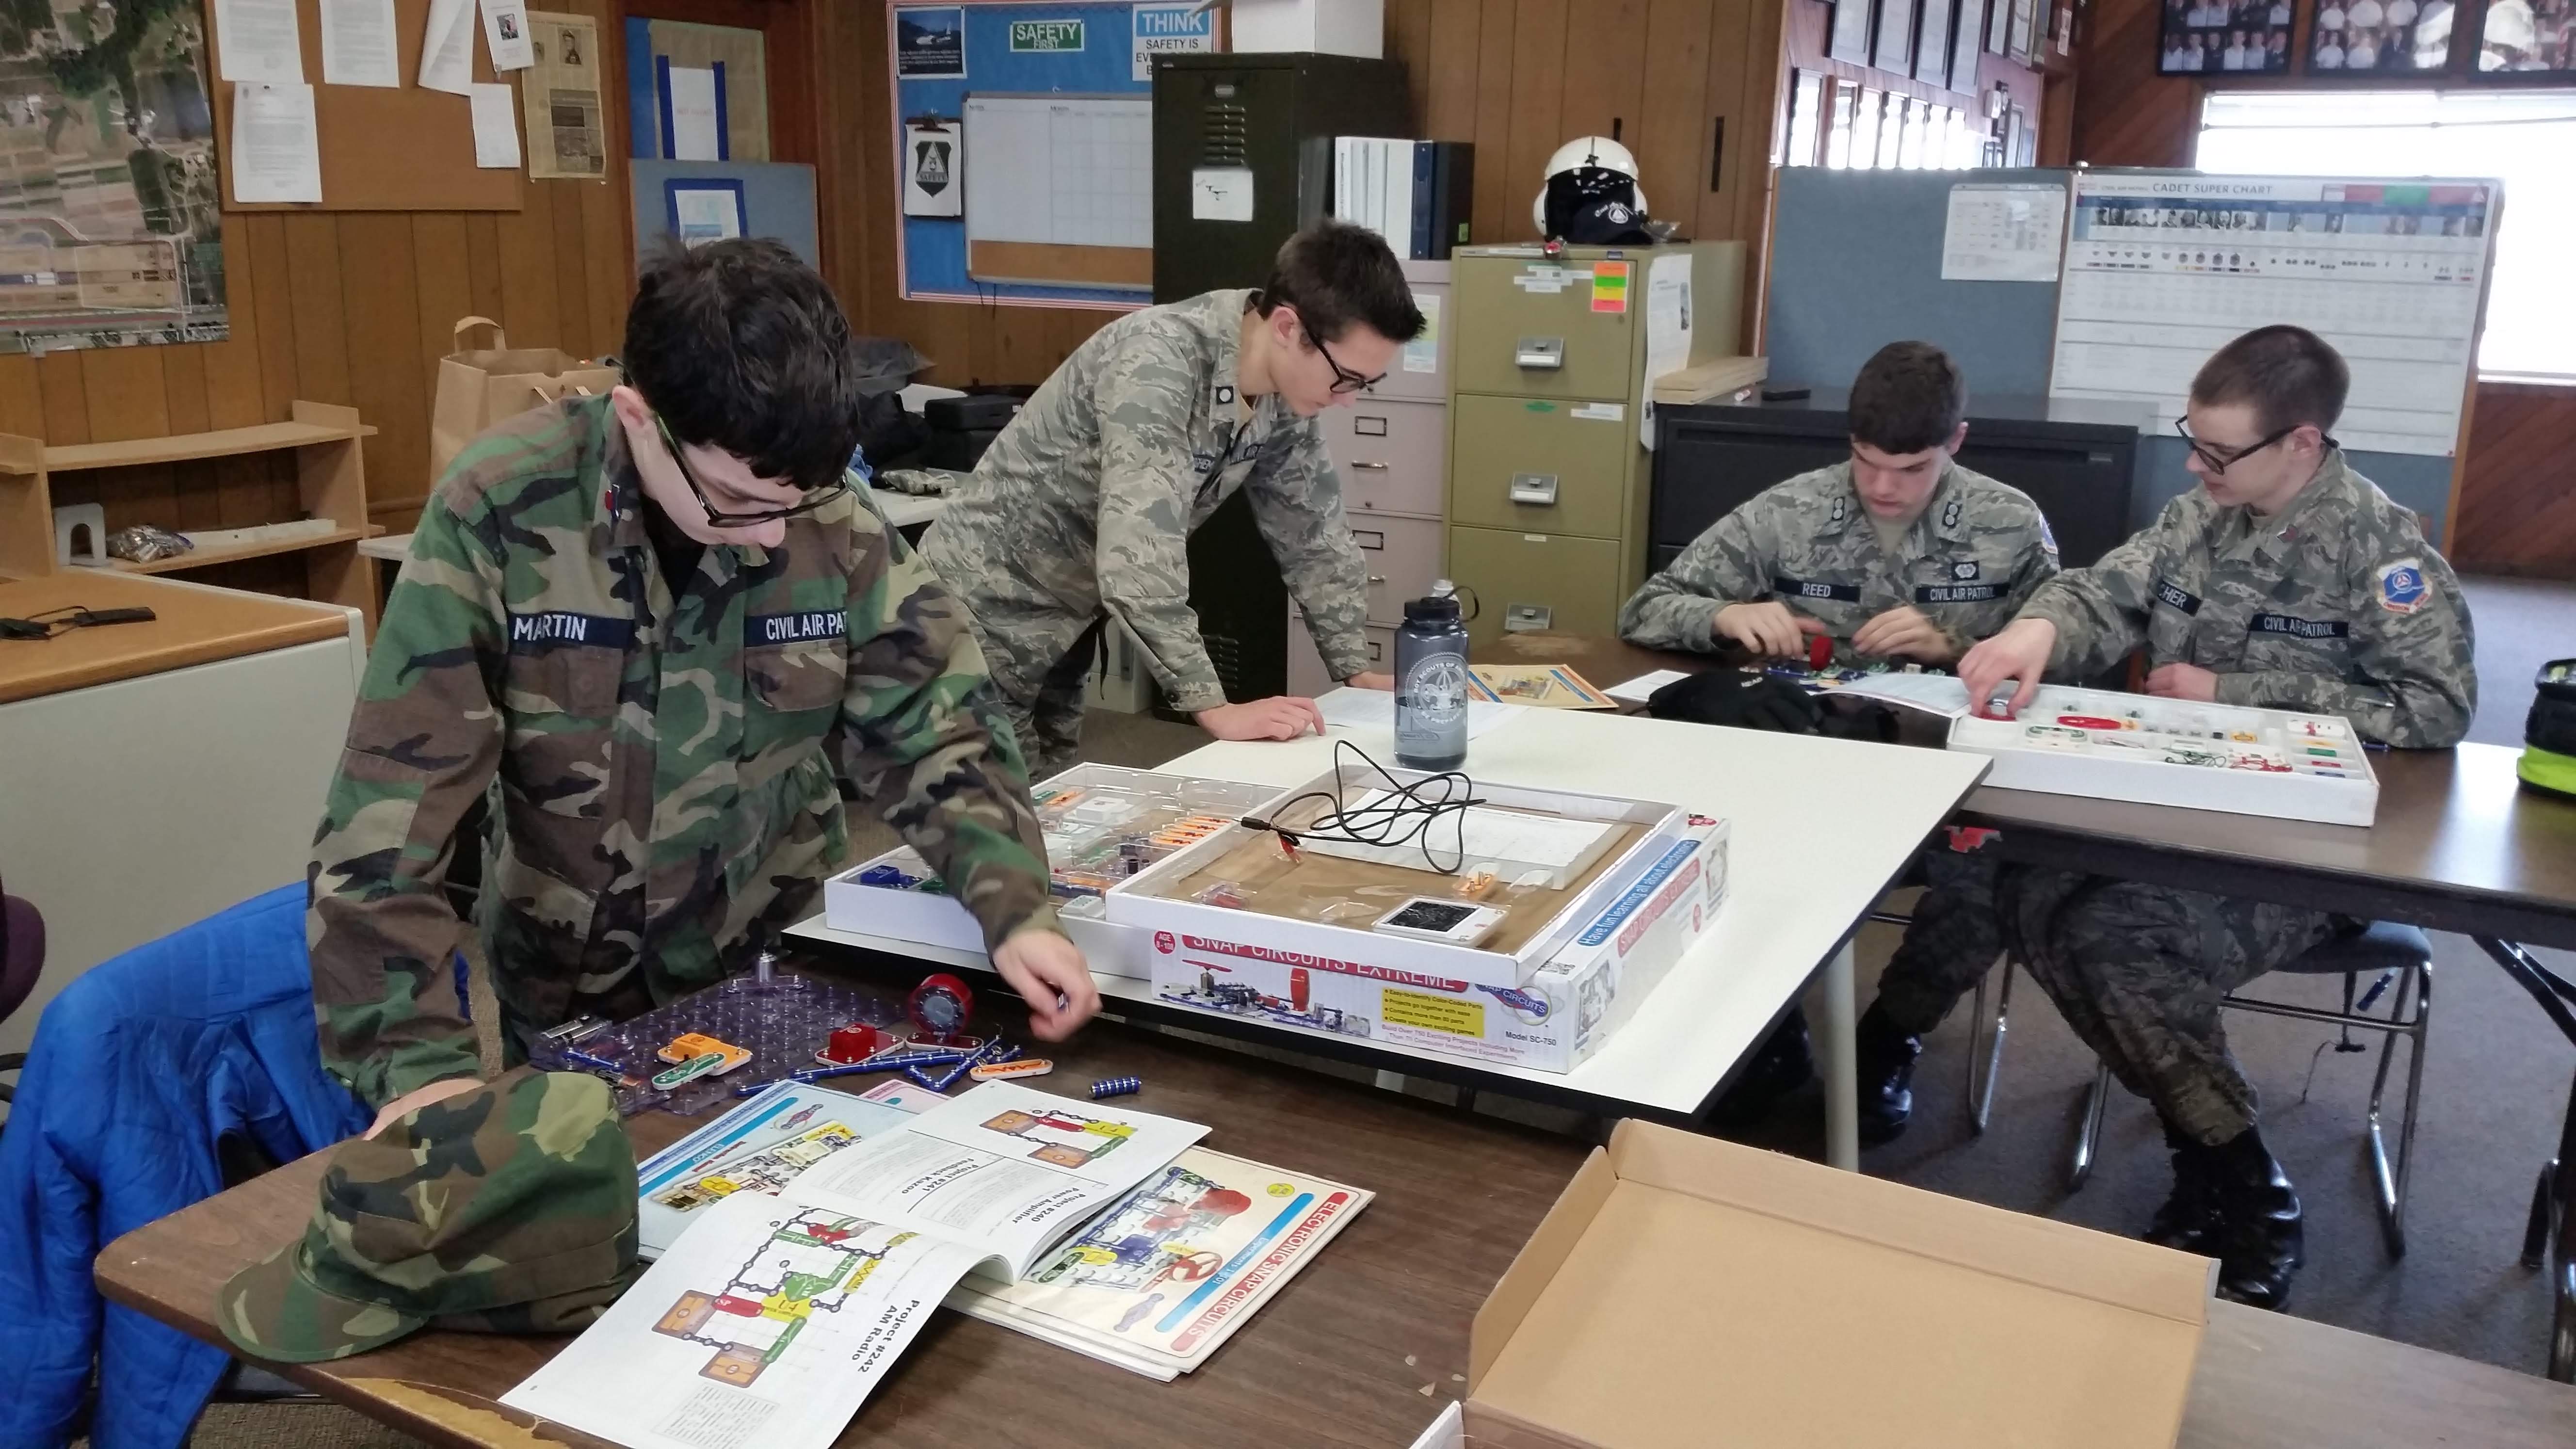 Cadets working in the squadron room